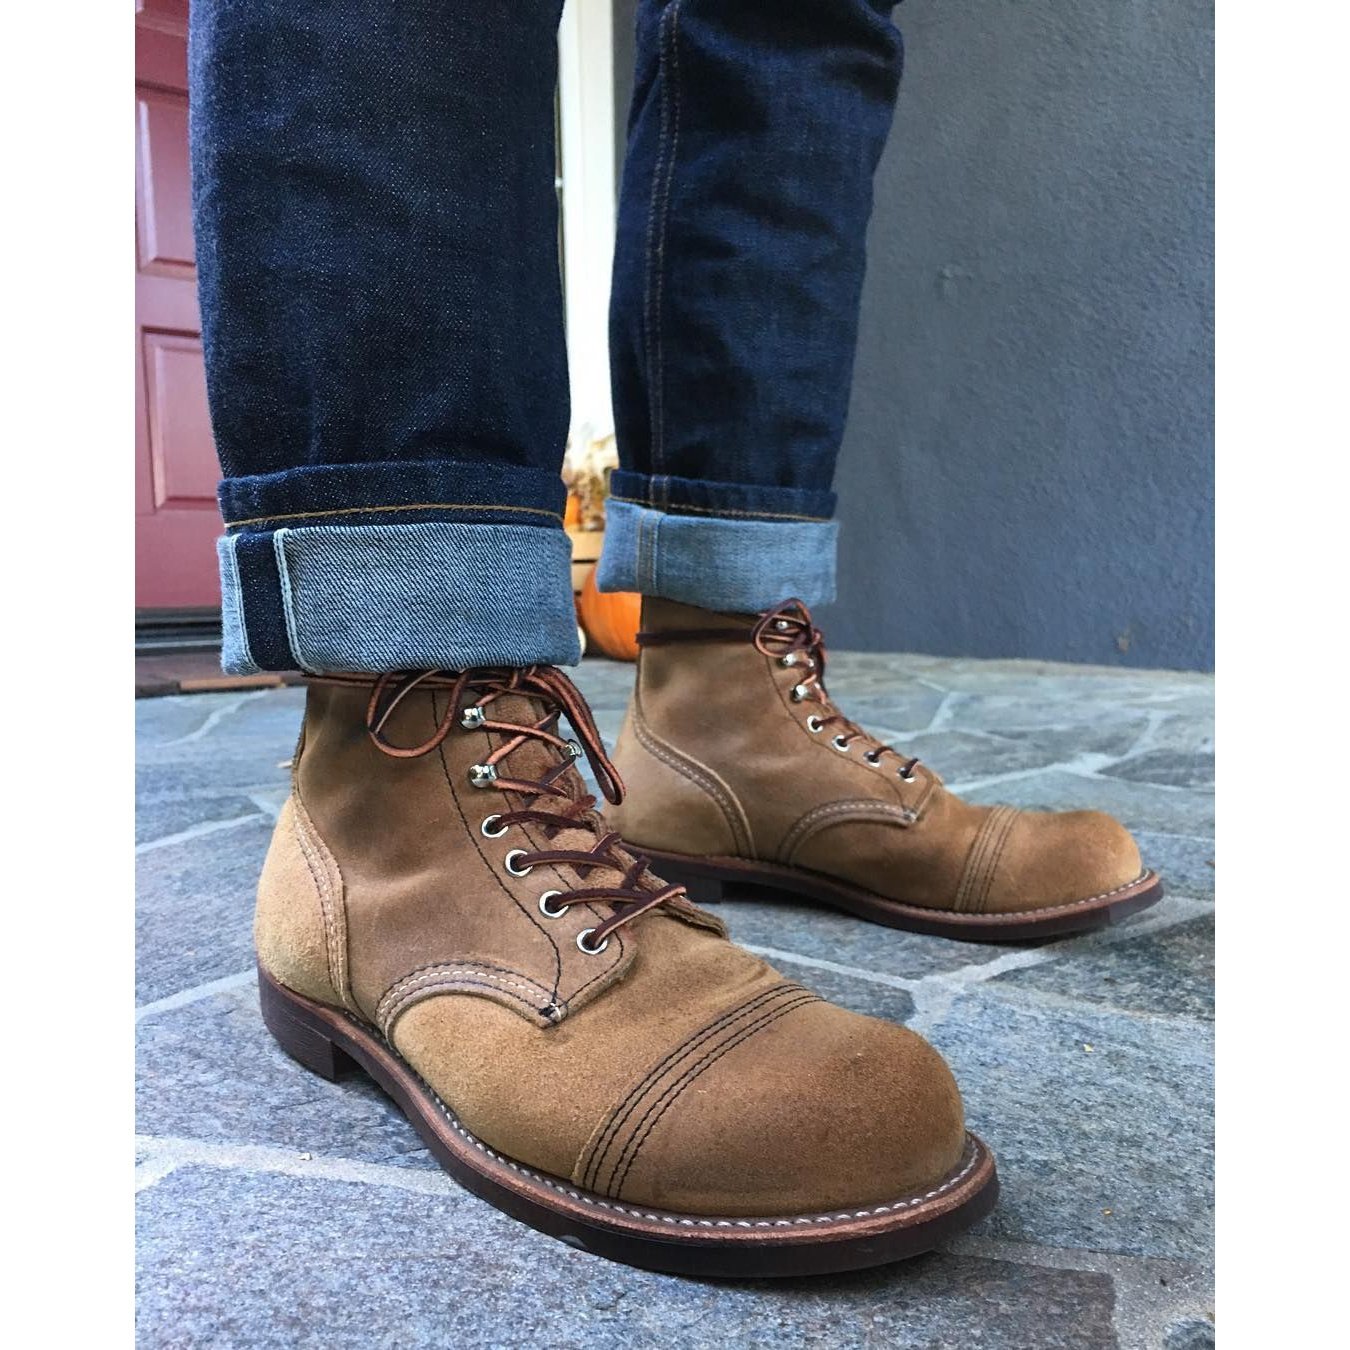 Redwing Iron Ranger, 8083 | The Boot Shed – The Boots Shed